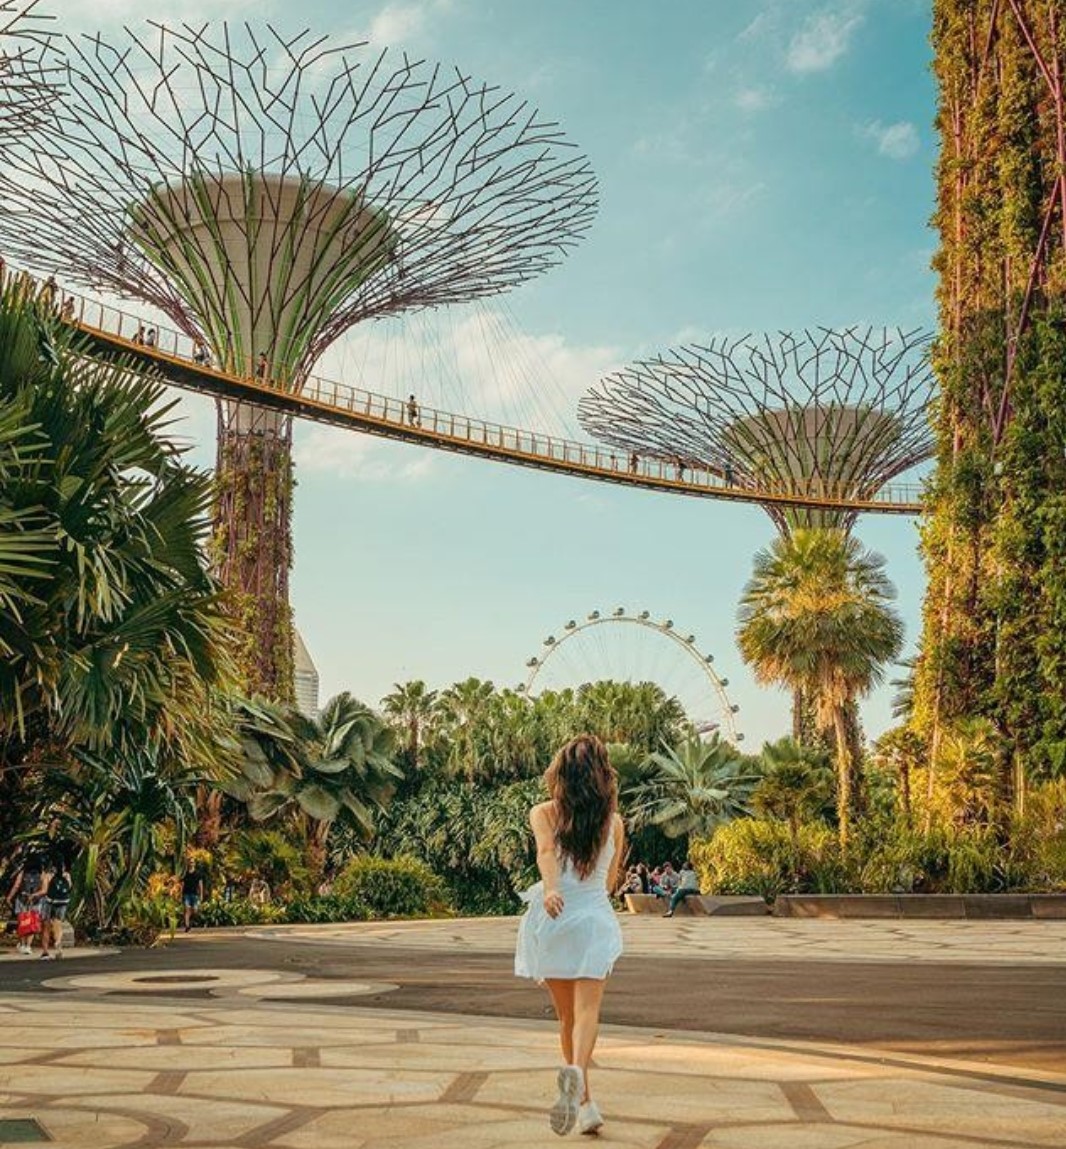 16:30 – 19:00: Gardens by the Bay